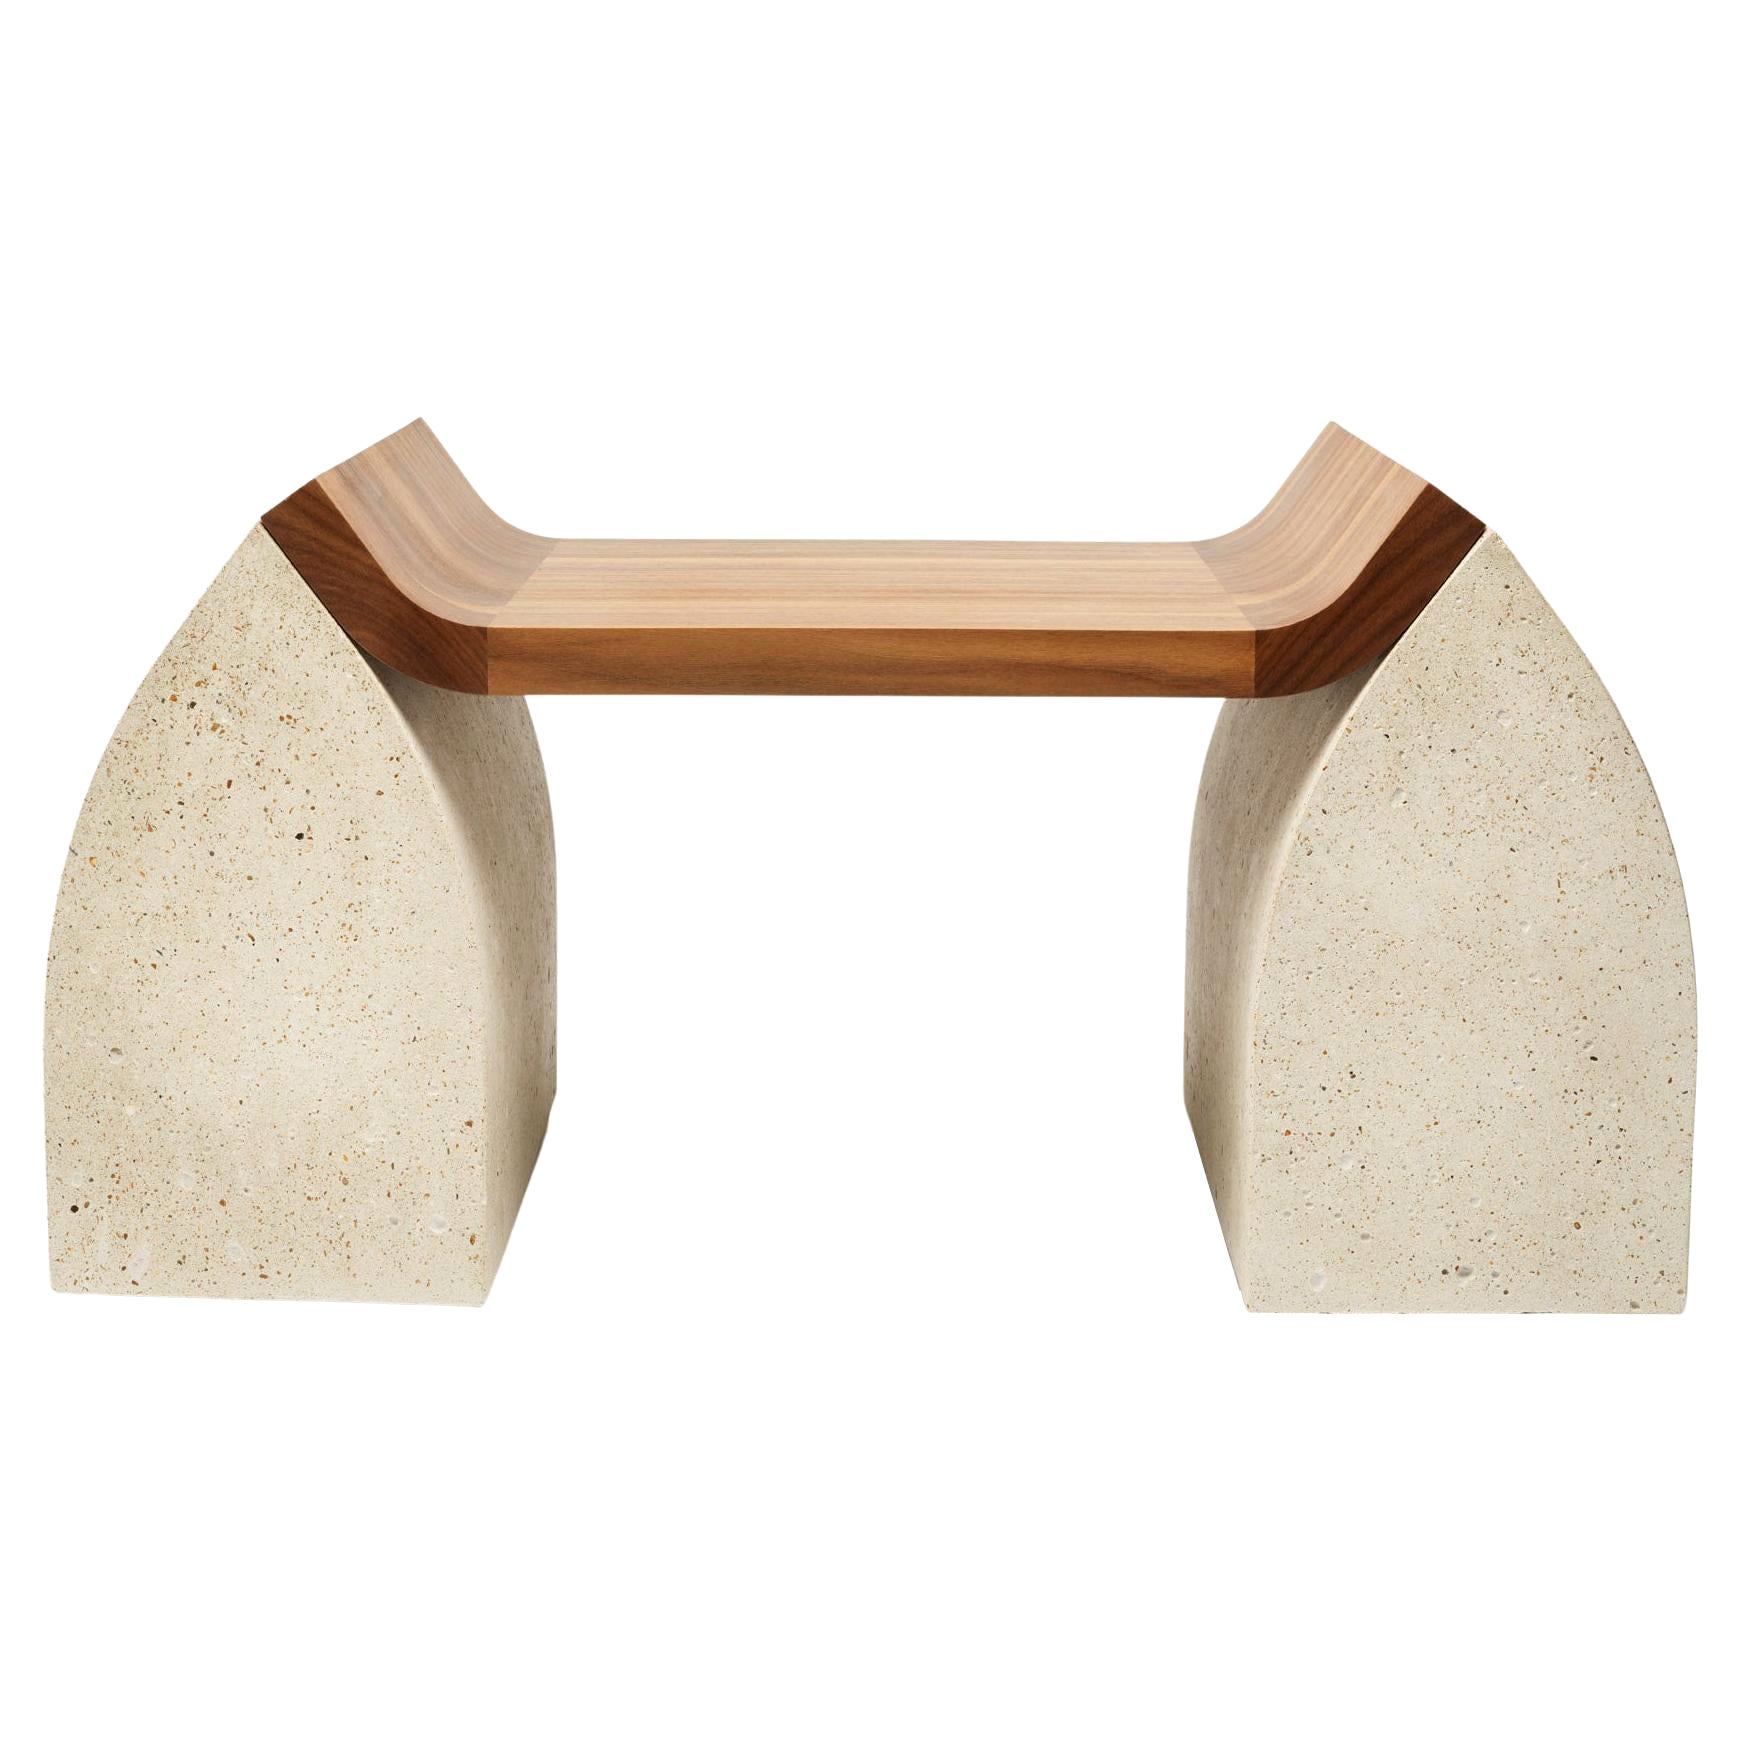 American Walnut, Granito Stone Traaf Bench Small by Tim Vranken For Sale